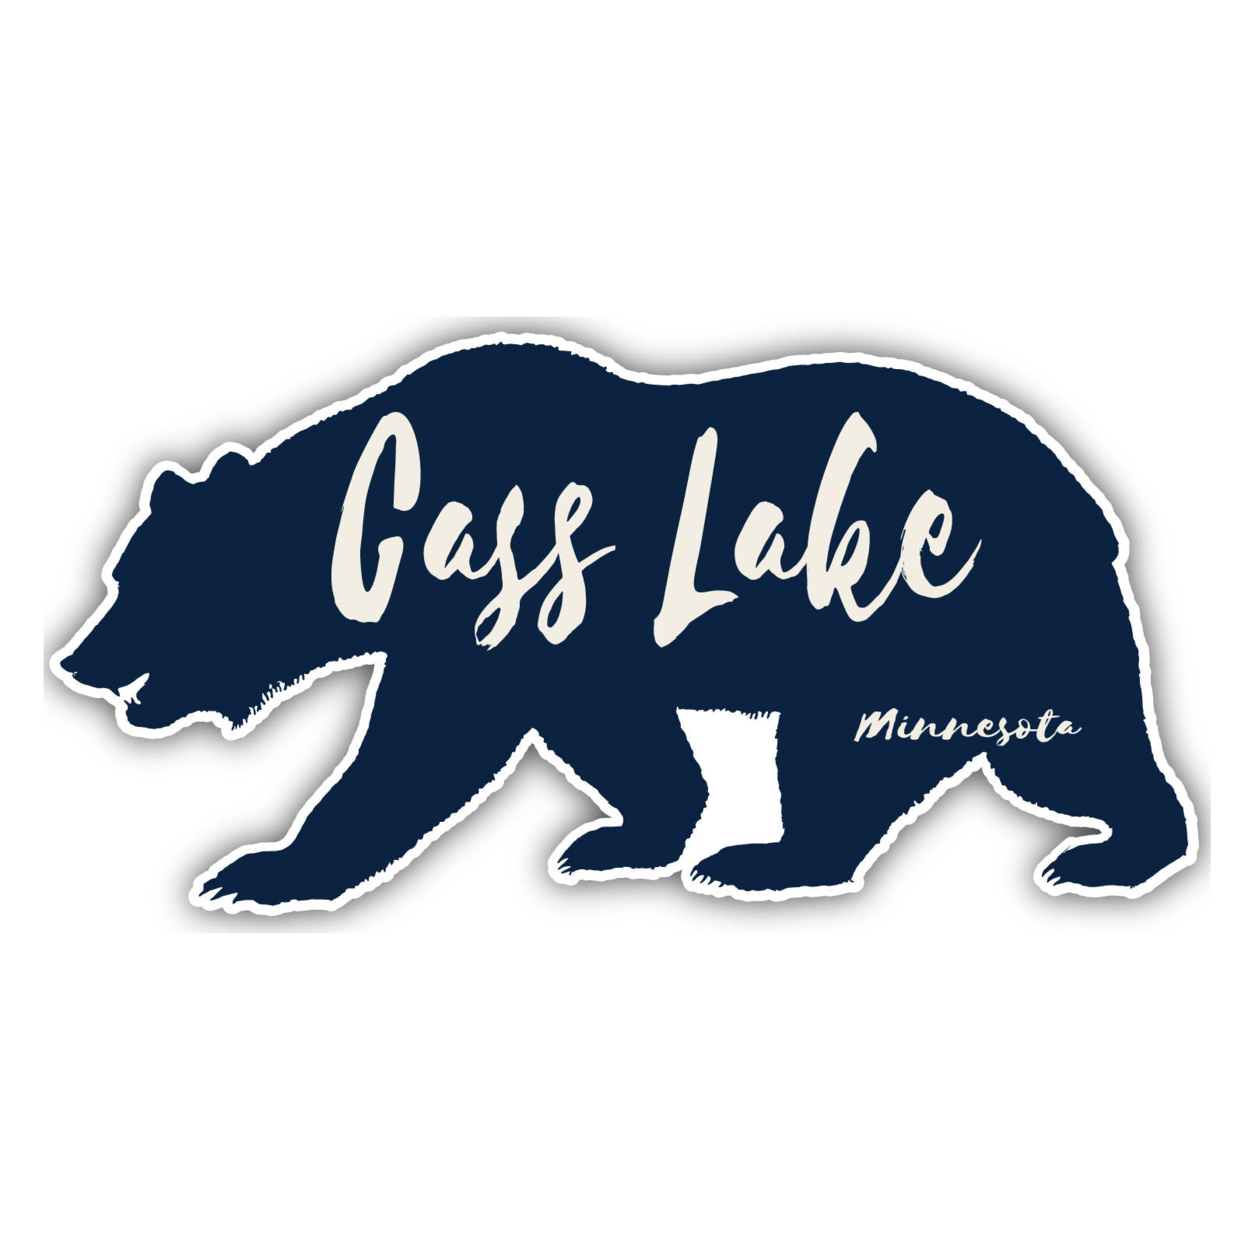 Cass Lake Minnesota Souvenir Decorative Stickers (Choose Theme And Size) - 4-Pack, 4-Inch, Camp Life